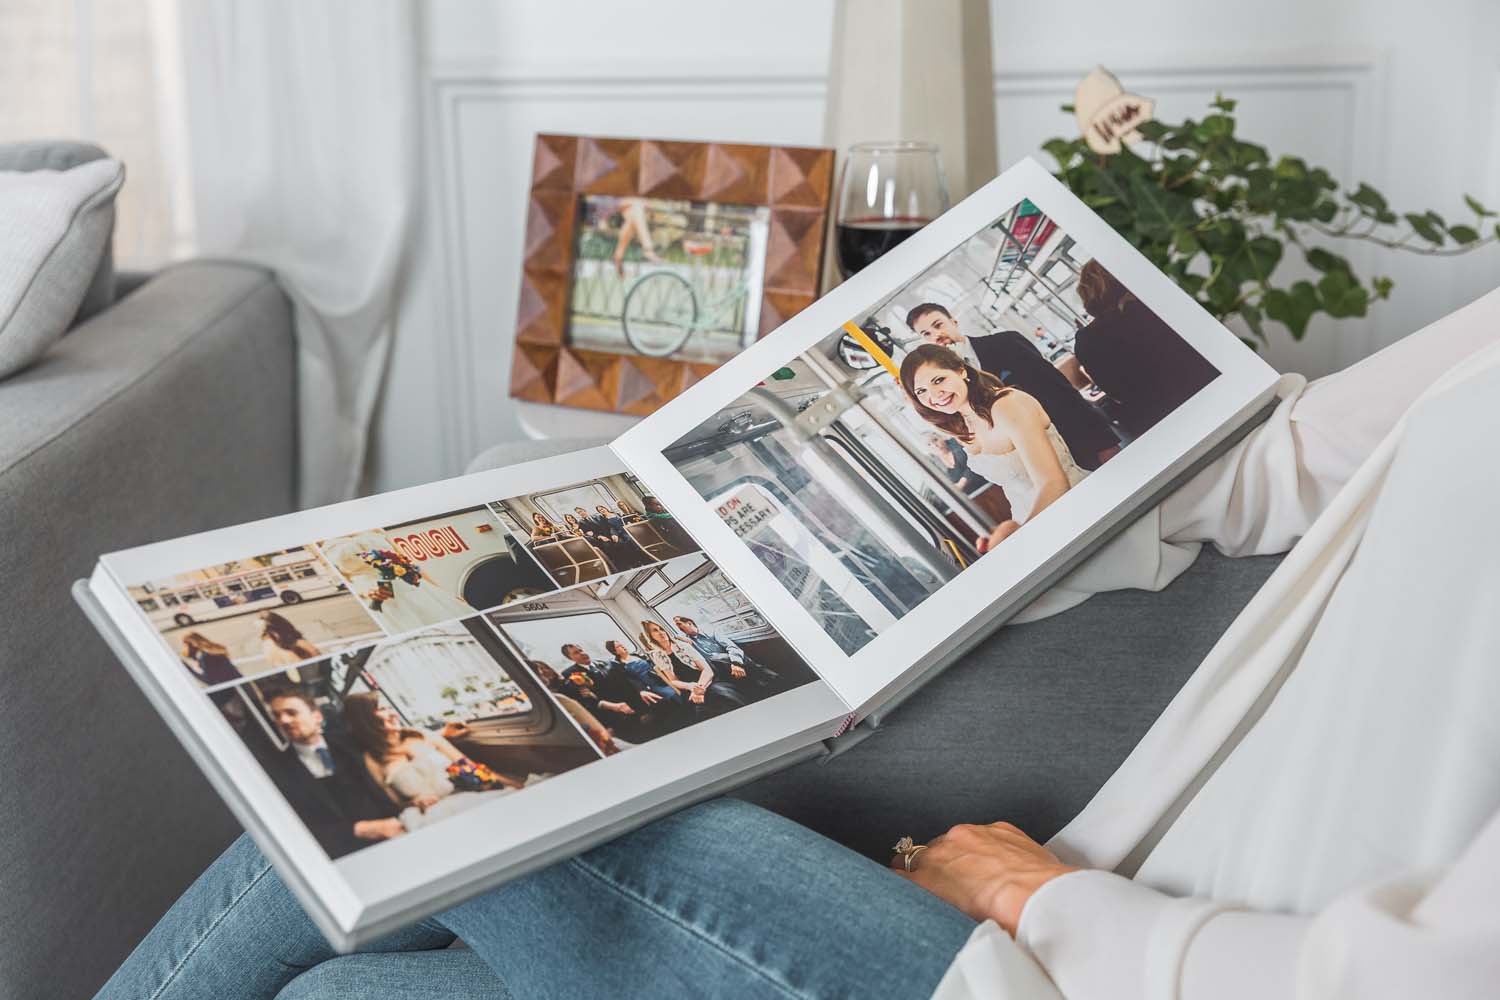 person sitting on a sofa with an Albums Remembered wedding album open on their lap showing a photo of a bride and groom standing in a bus